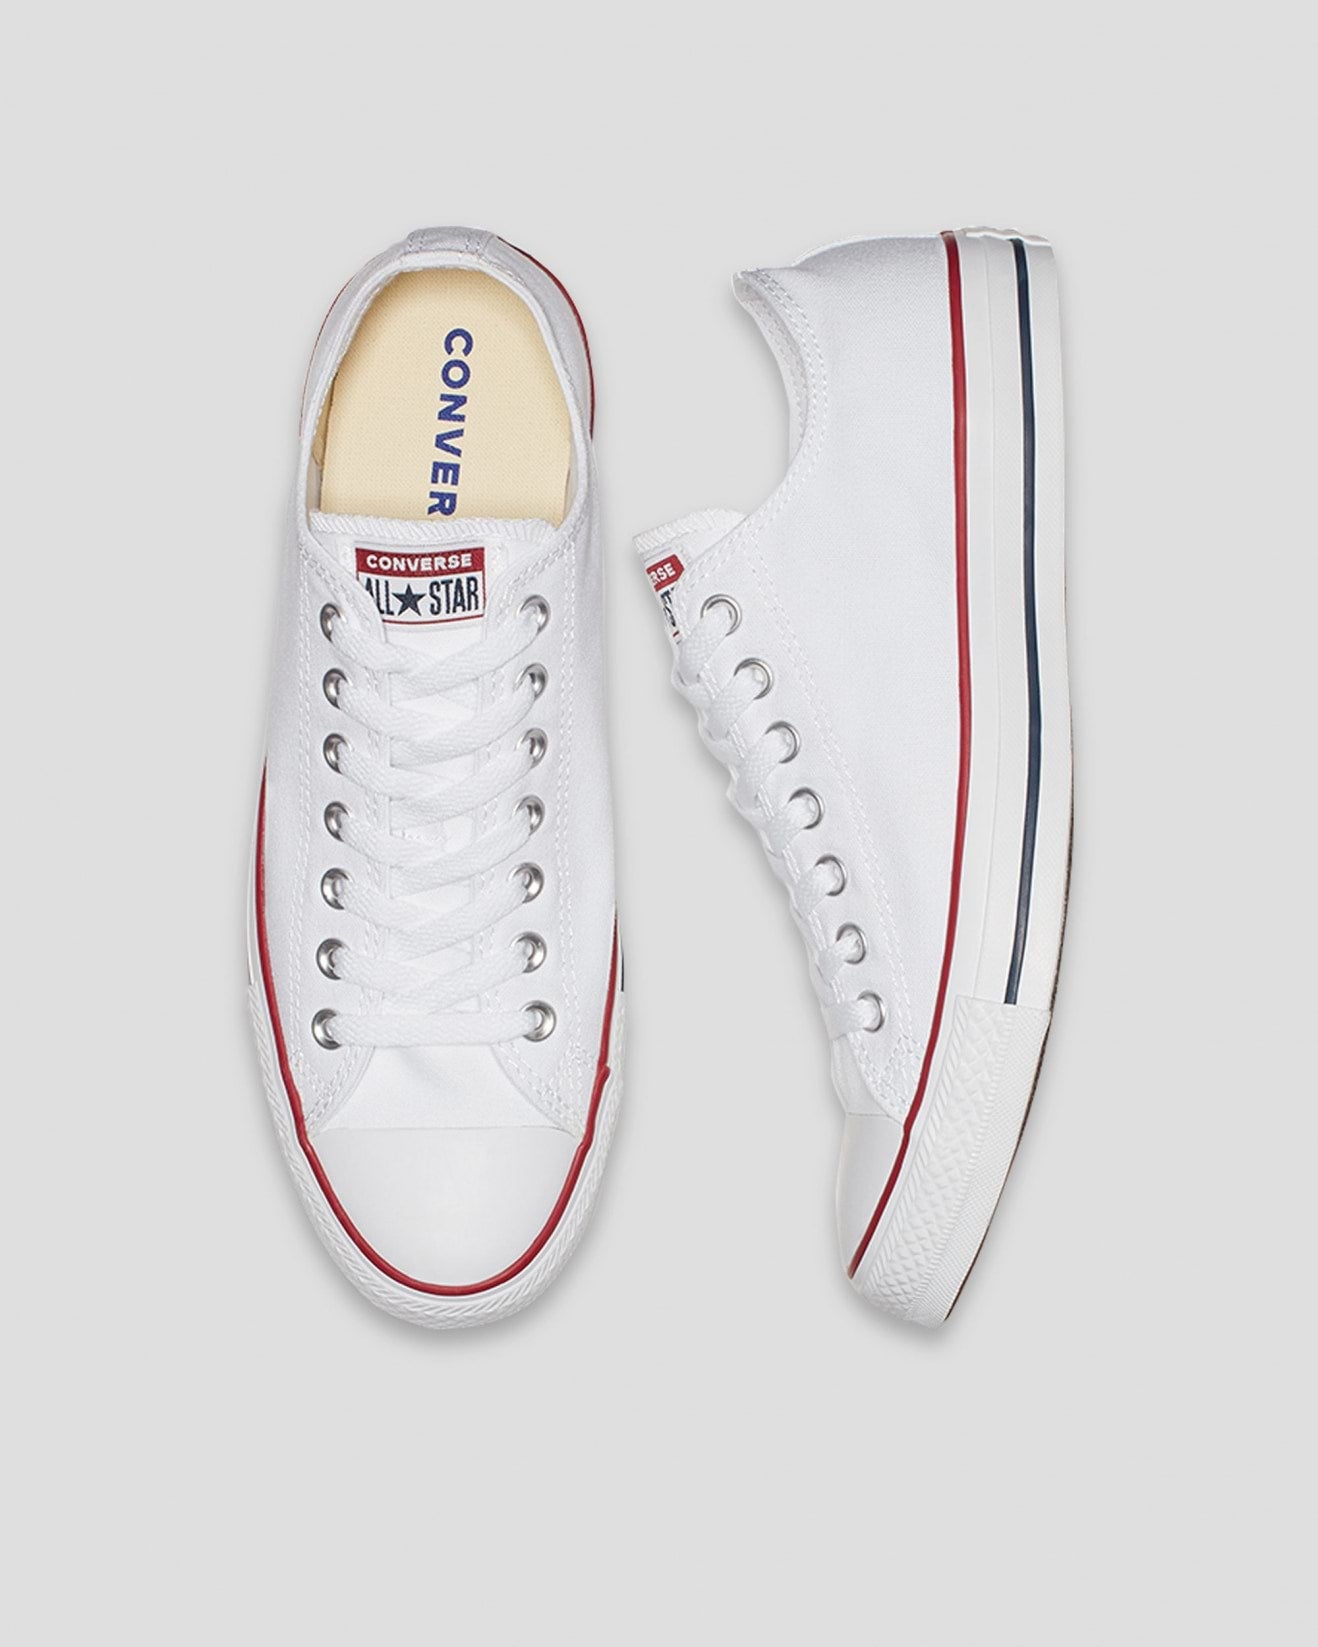 CONVERSE Chuck Taylor All Star Low Shoe - Optical White - VENUE.